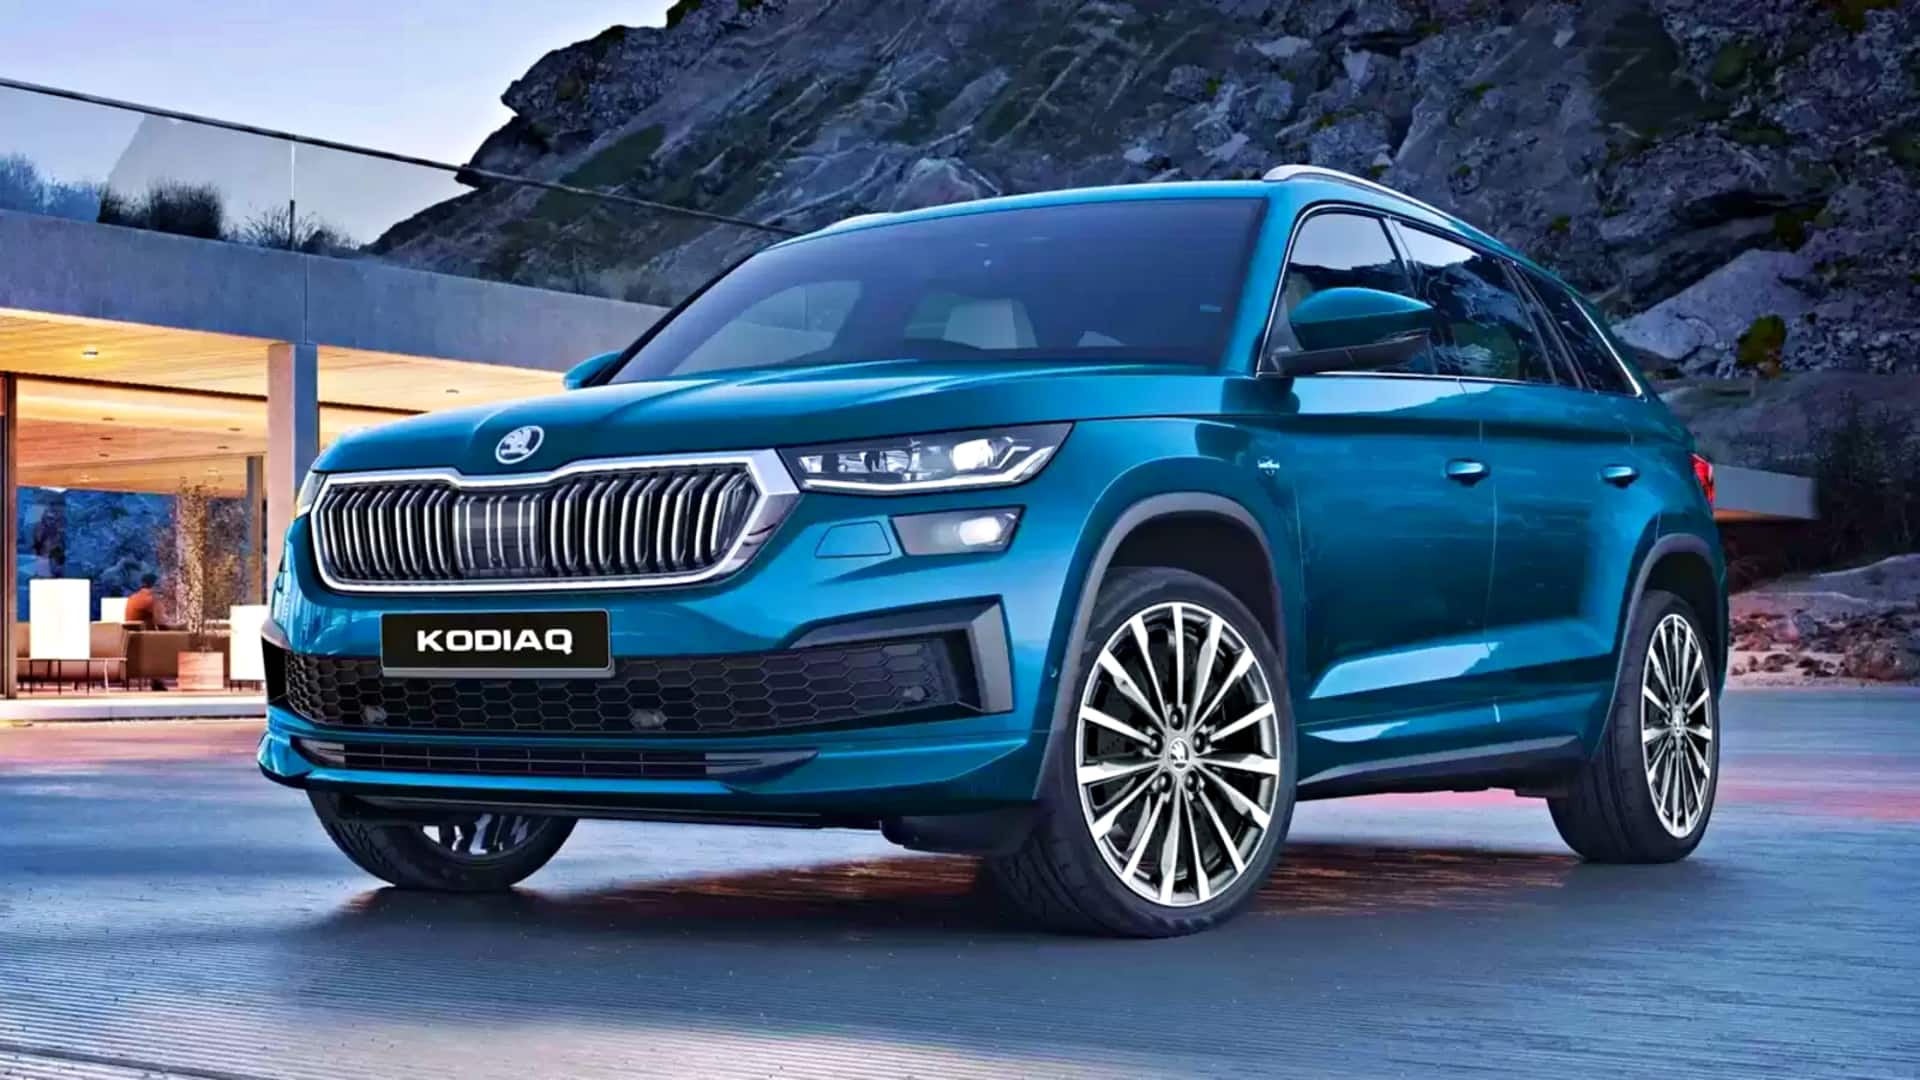 SKODA KODIAQ becomes costlier by up to Rs. 56,000